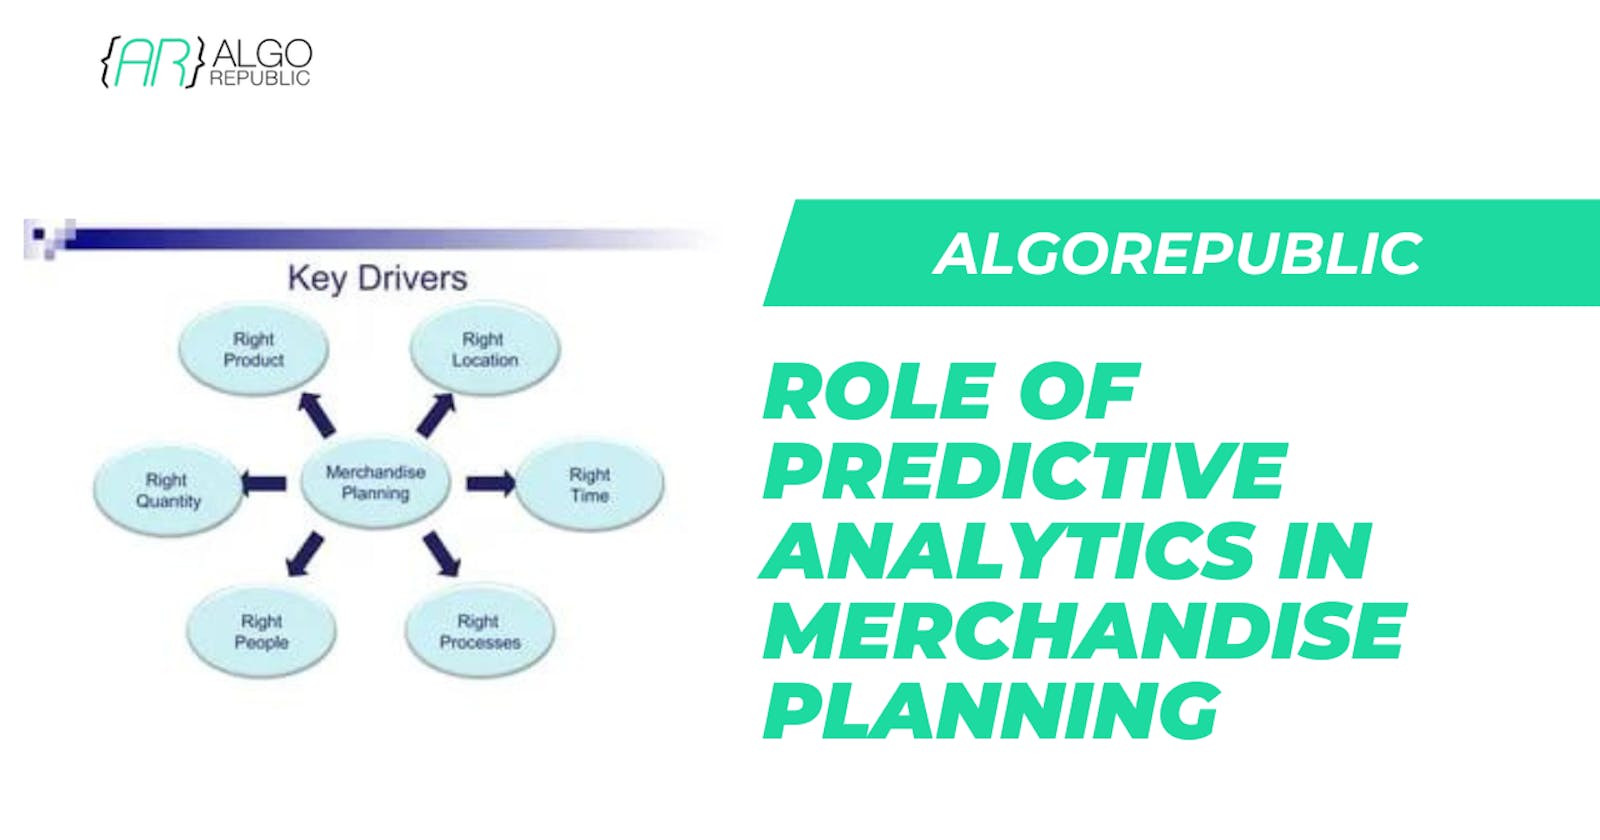 The Role of Predictive Analytics in Merchandise Planning